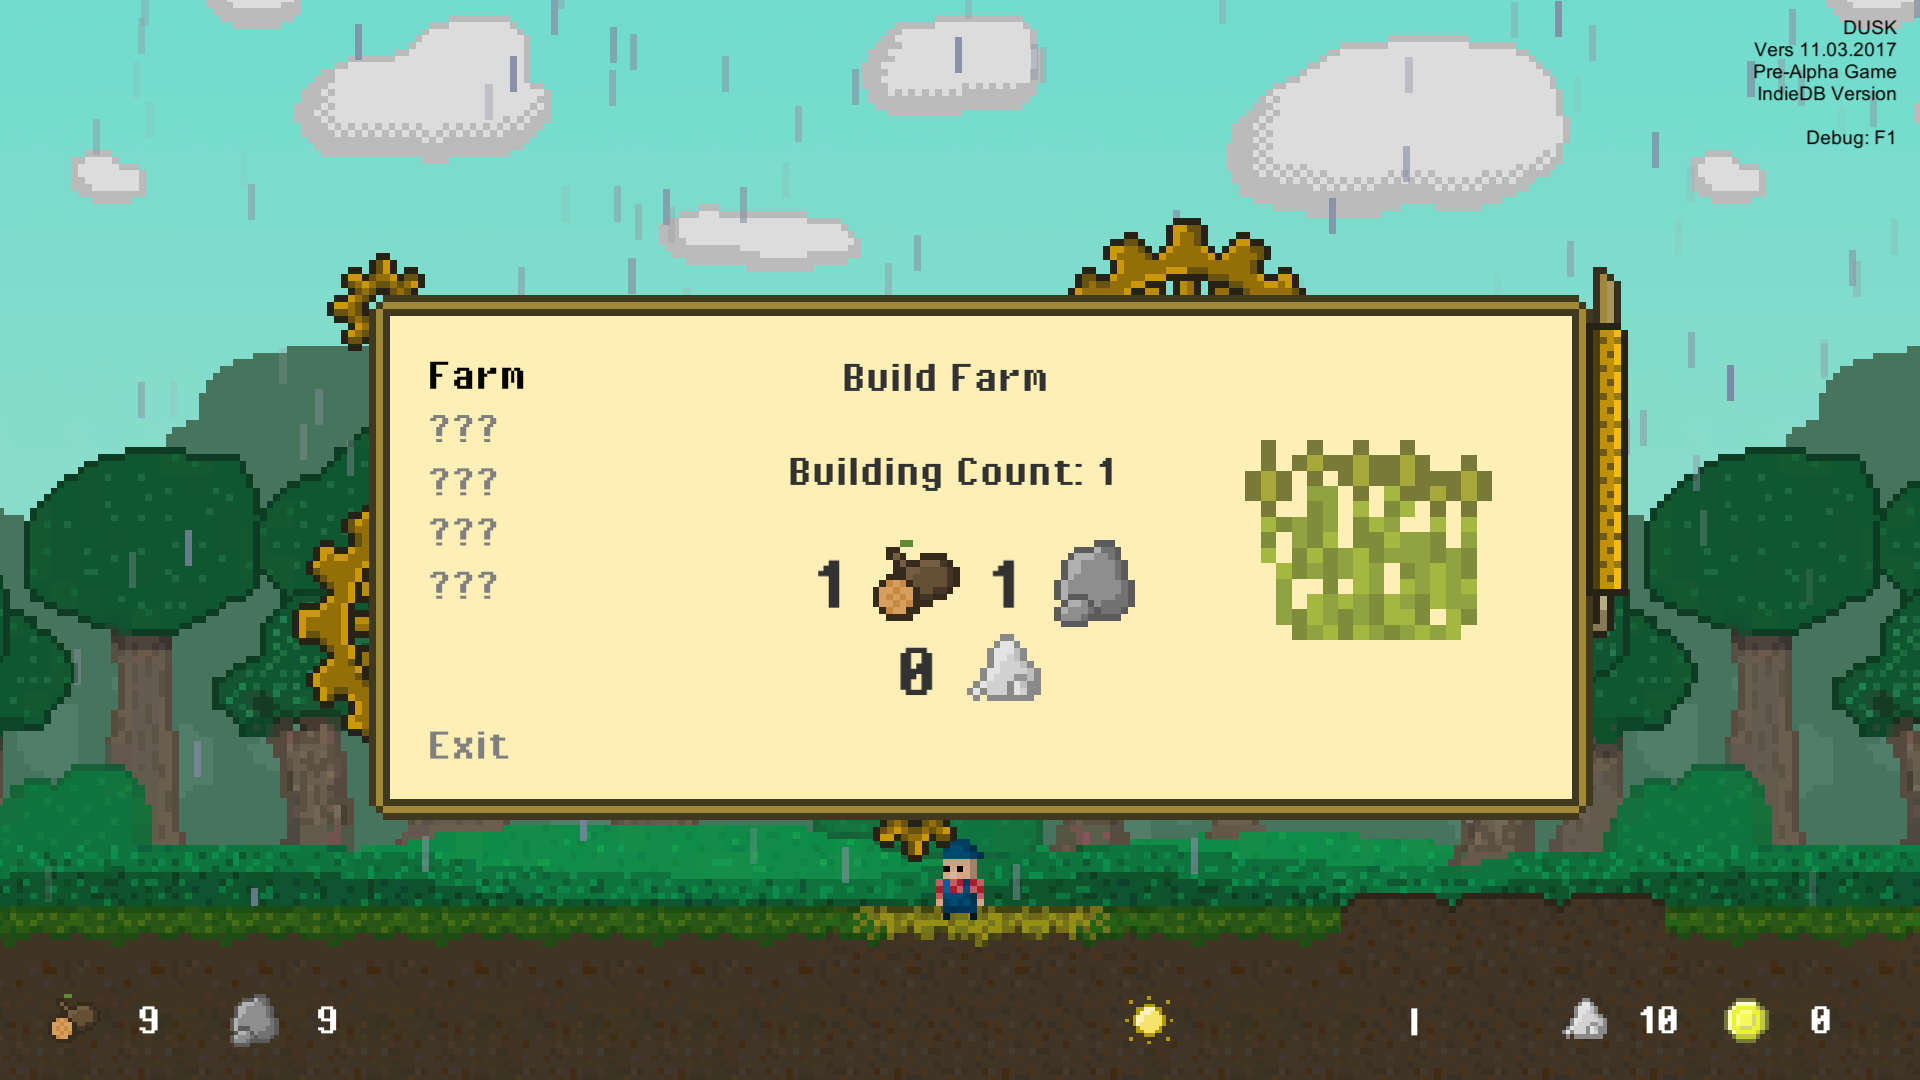 The first steps are building up your farm - but soon you'll get access to a wide variety of artillery